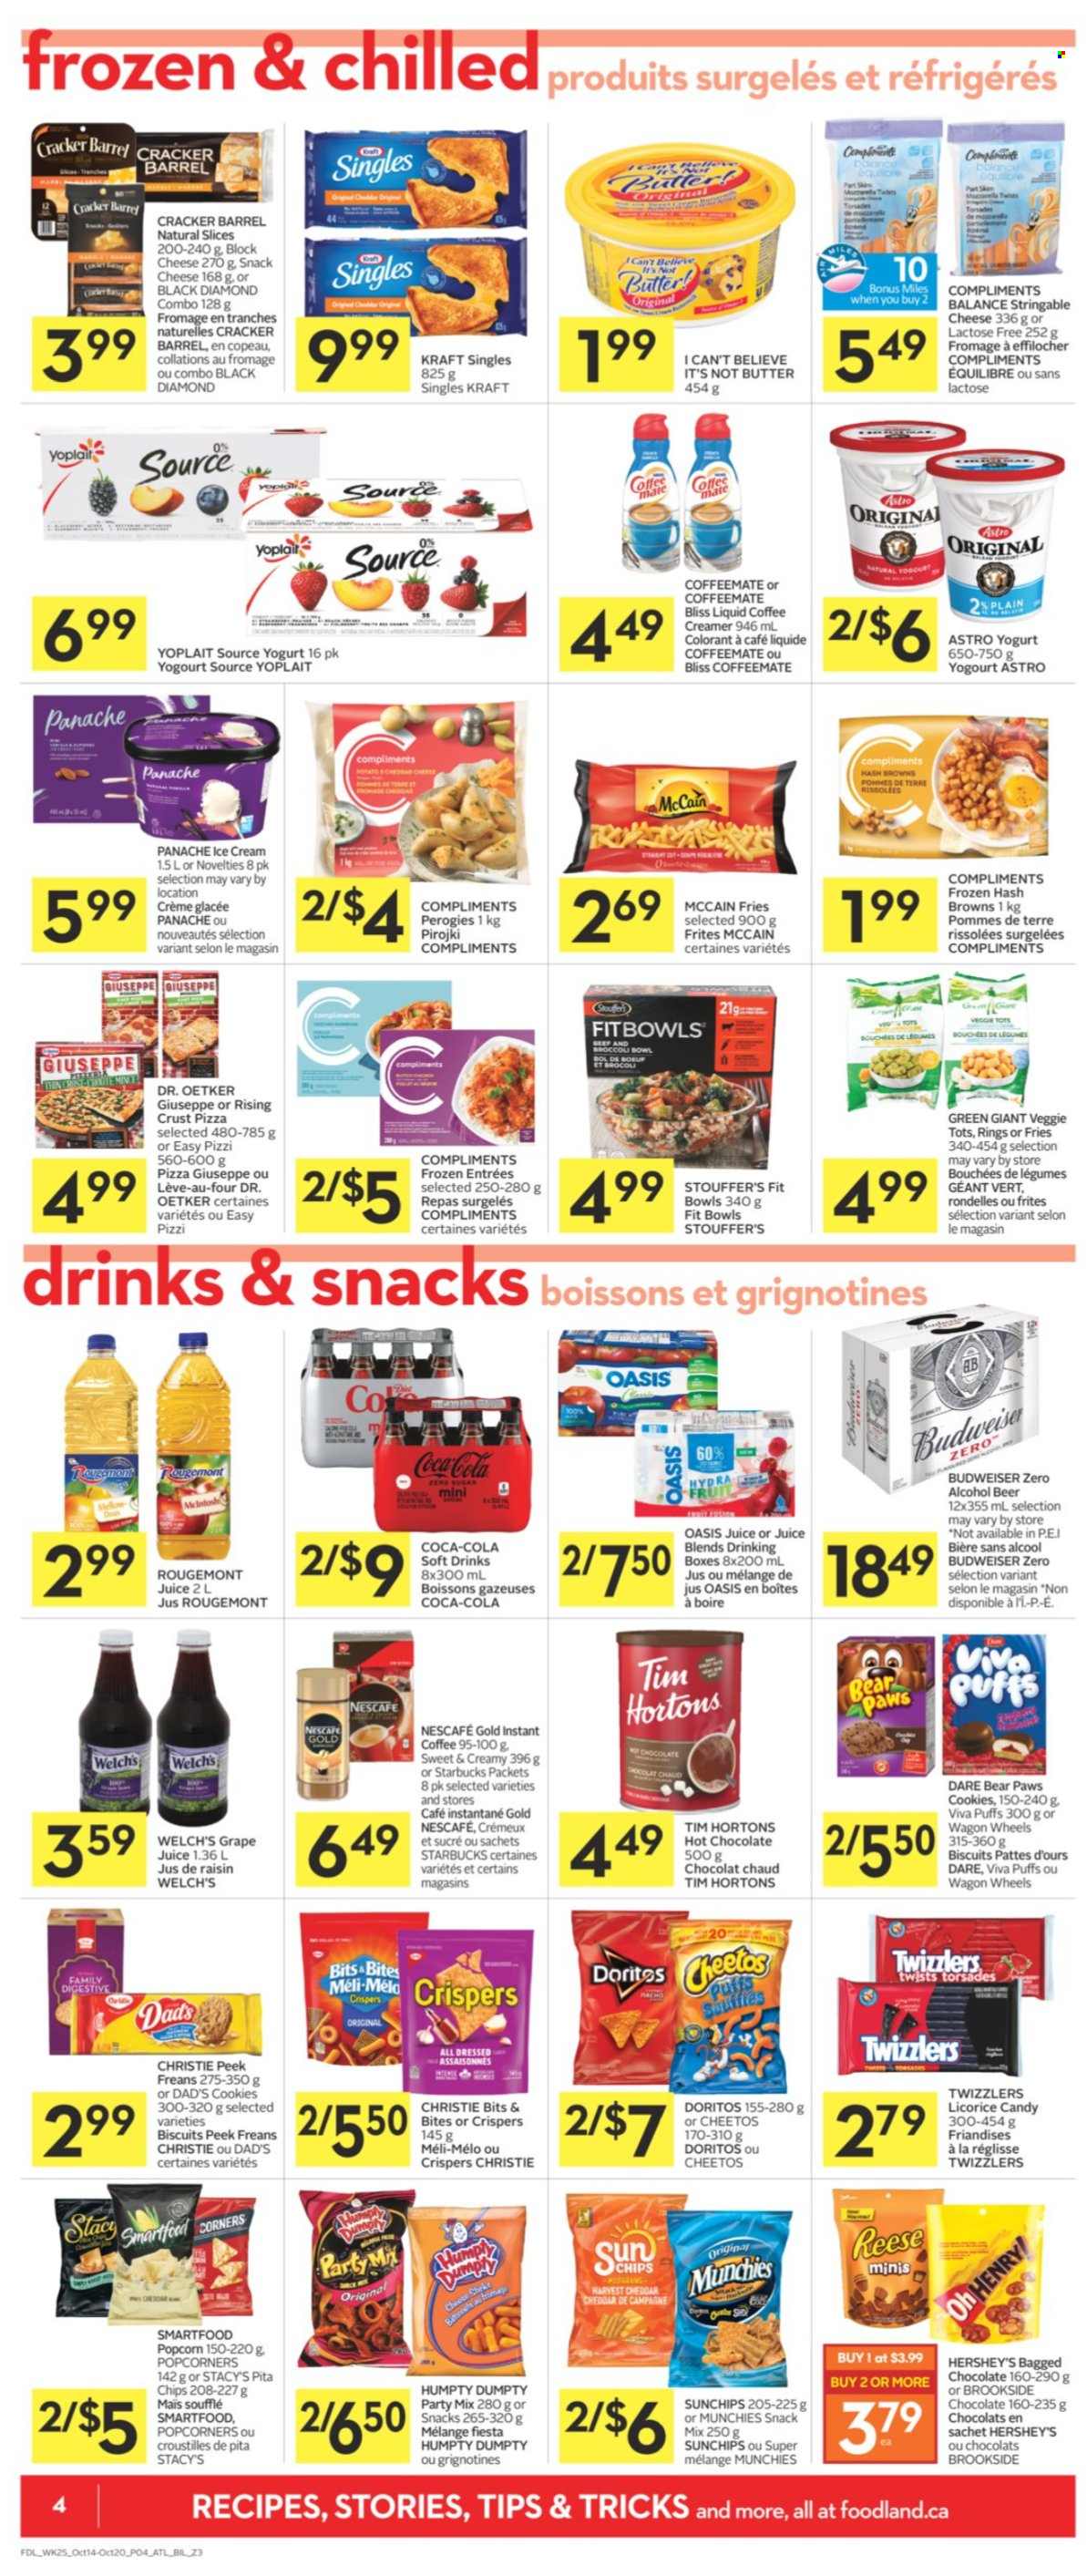 thumbnail - Co-op Flyer - October 14, 2021 - October 20, 2021 - Sales products - puffs, Welch's, pizza, Kraft®, sandwich slices, Dr. Oetker, Kraft Singles, yoghurt, Yoplait, butter, I Can't Believe It's Not Butter, creamer, ice cream, Hershey's, Stouffer's, McCain, hash browns, potato fries, cookies, crackers, biscuit, Digestive, Doritos, Cheetos, Smartfood, popcorn, pita chips, Coca-Cola, juice, soft drink, hot chocolate, instant coffee, L'Or, Starbucks, alcohol, beer, Budweiser, Nescafé. Page 6.